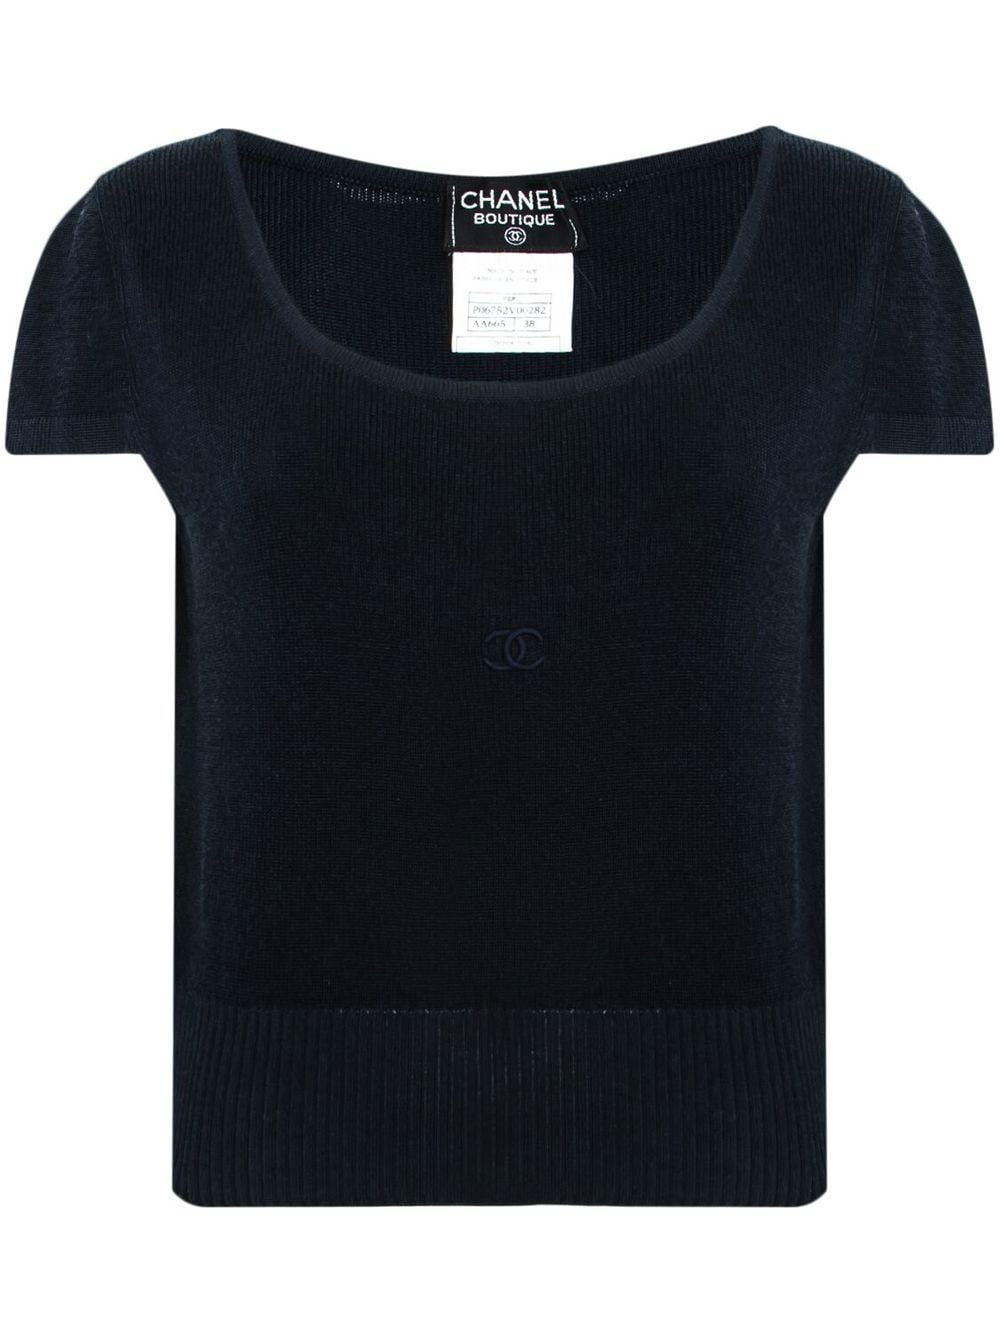 Image 1 of CHANEL Pre-Owned 1996-1997 logo knit top